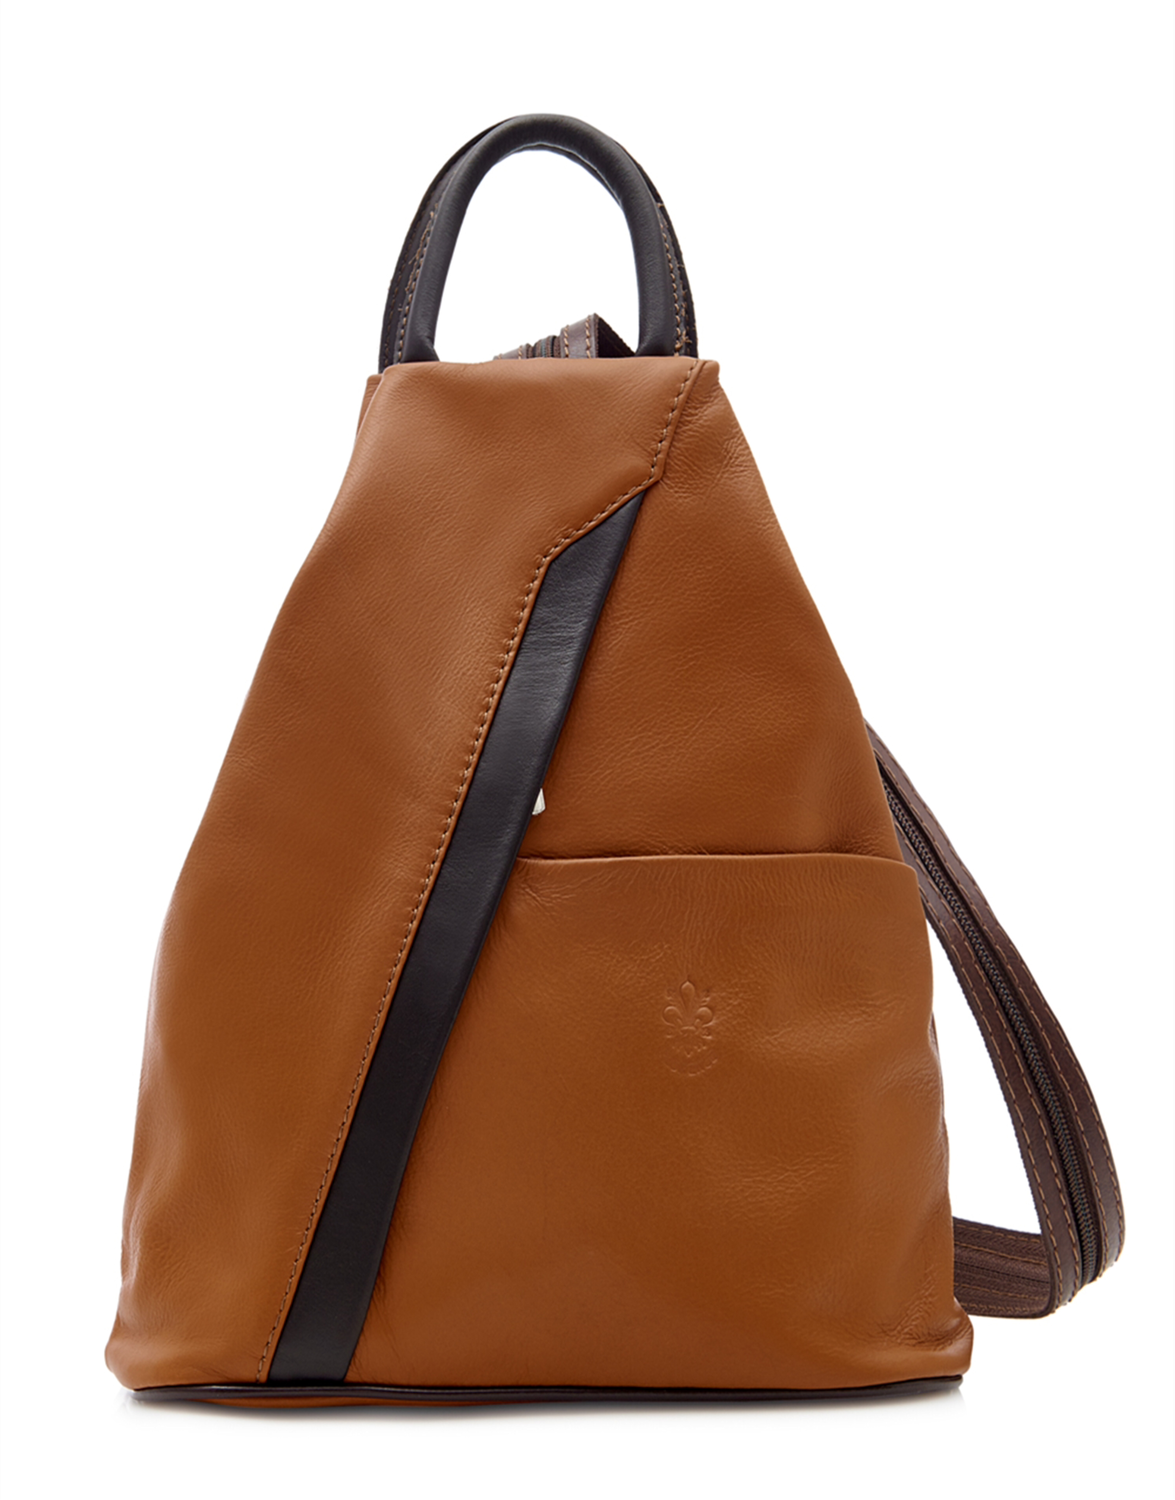 Tan With Chocolate and Dark Tan Trim Soft Leather Backpack